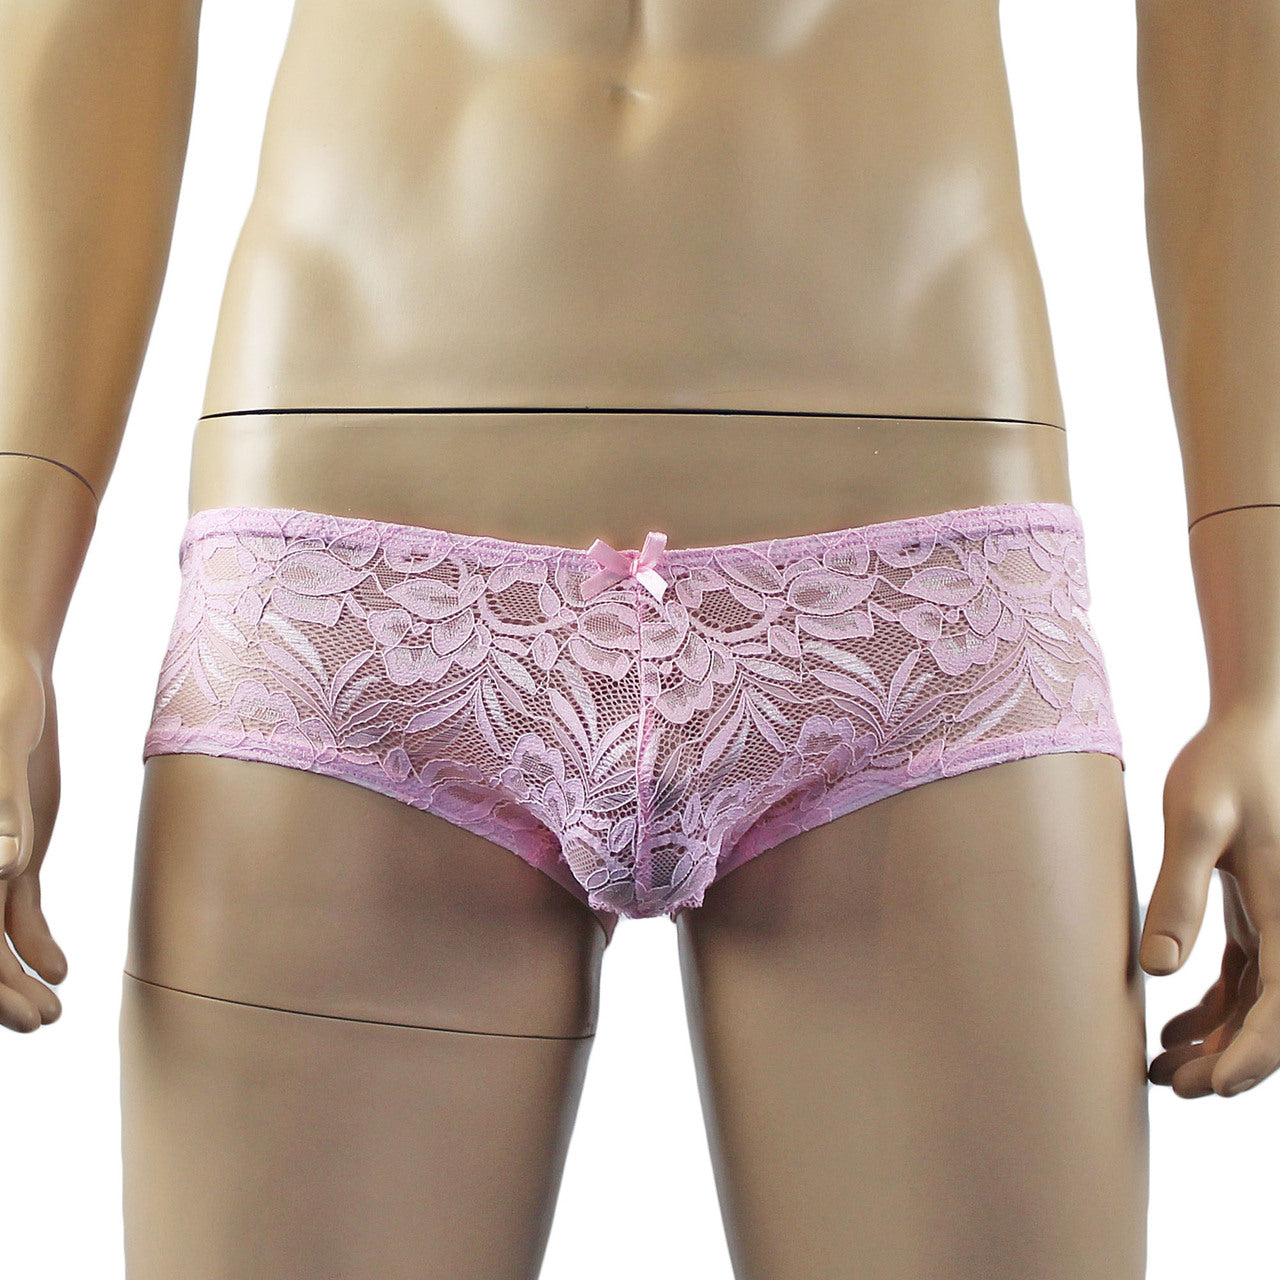 Mens Kristy Lingerie Sexy Lace and Mesh Panty Brief Light Pink